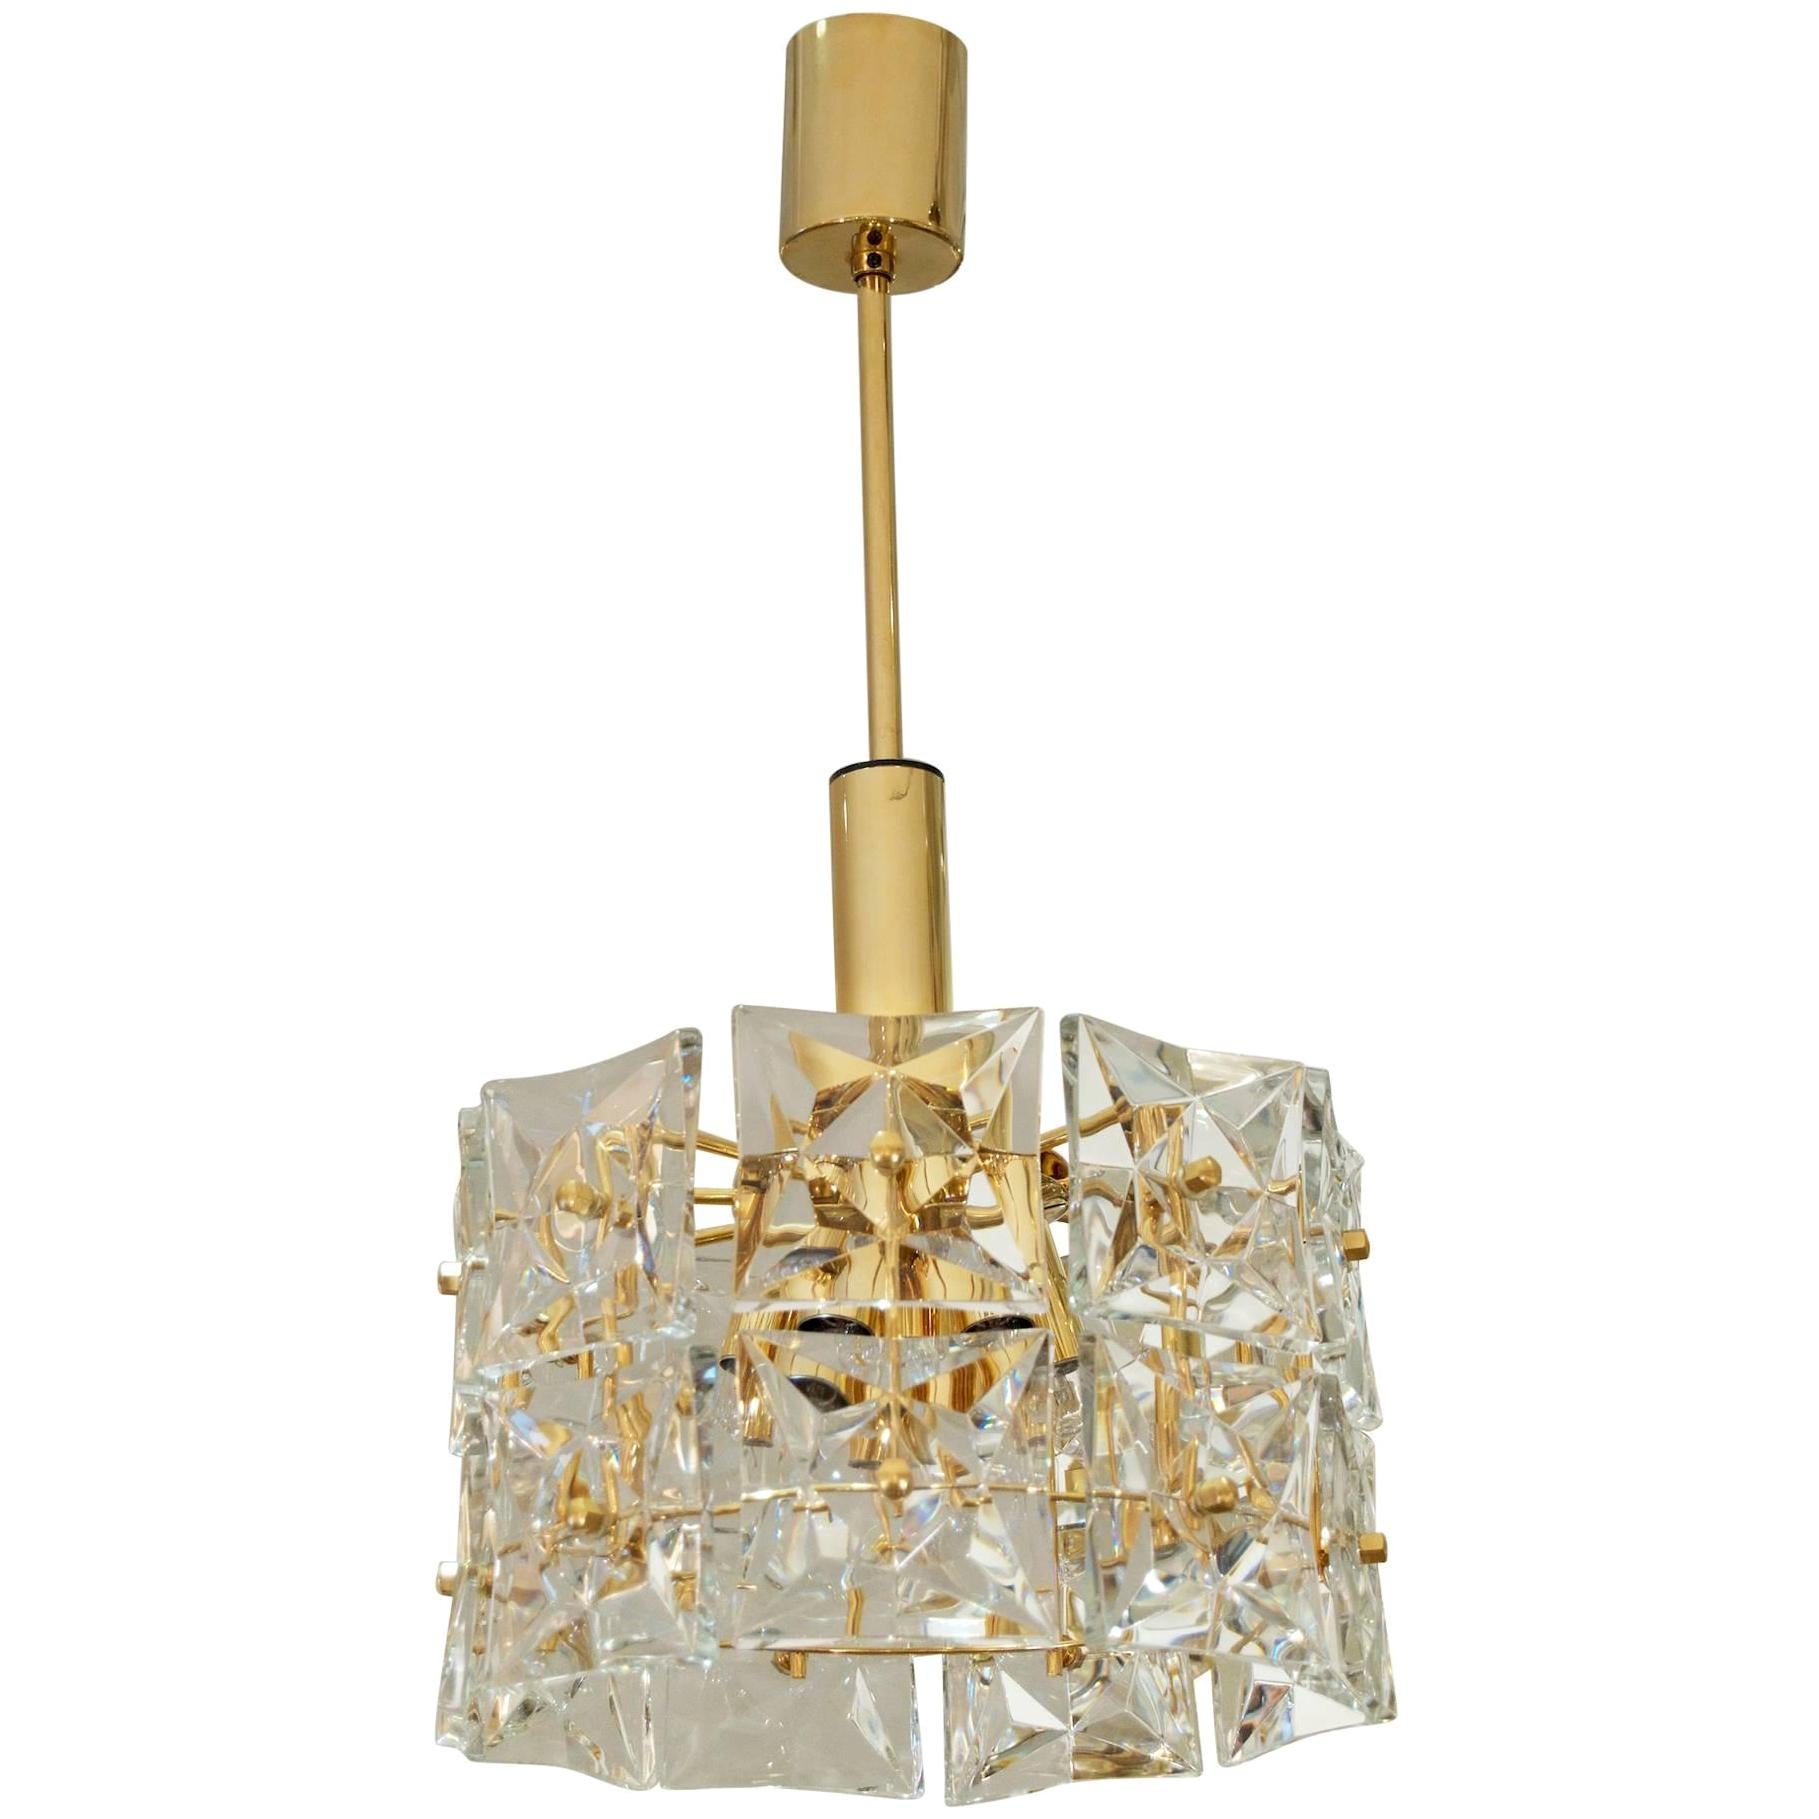 Two-Tier Goldplate Drum-Form Chandelier with Square Crystals by Kinkeldey For Sale